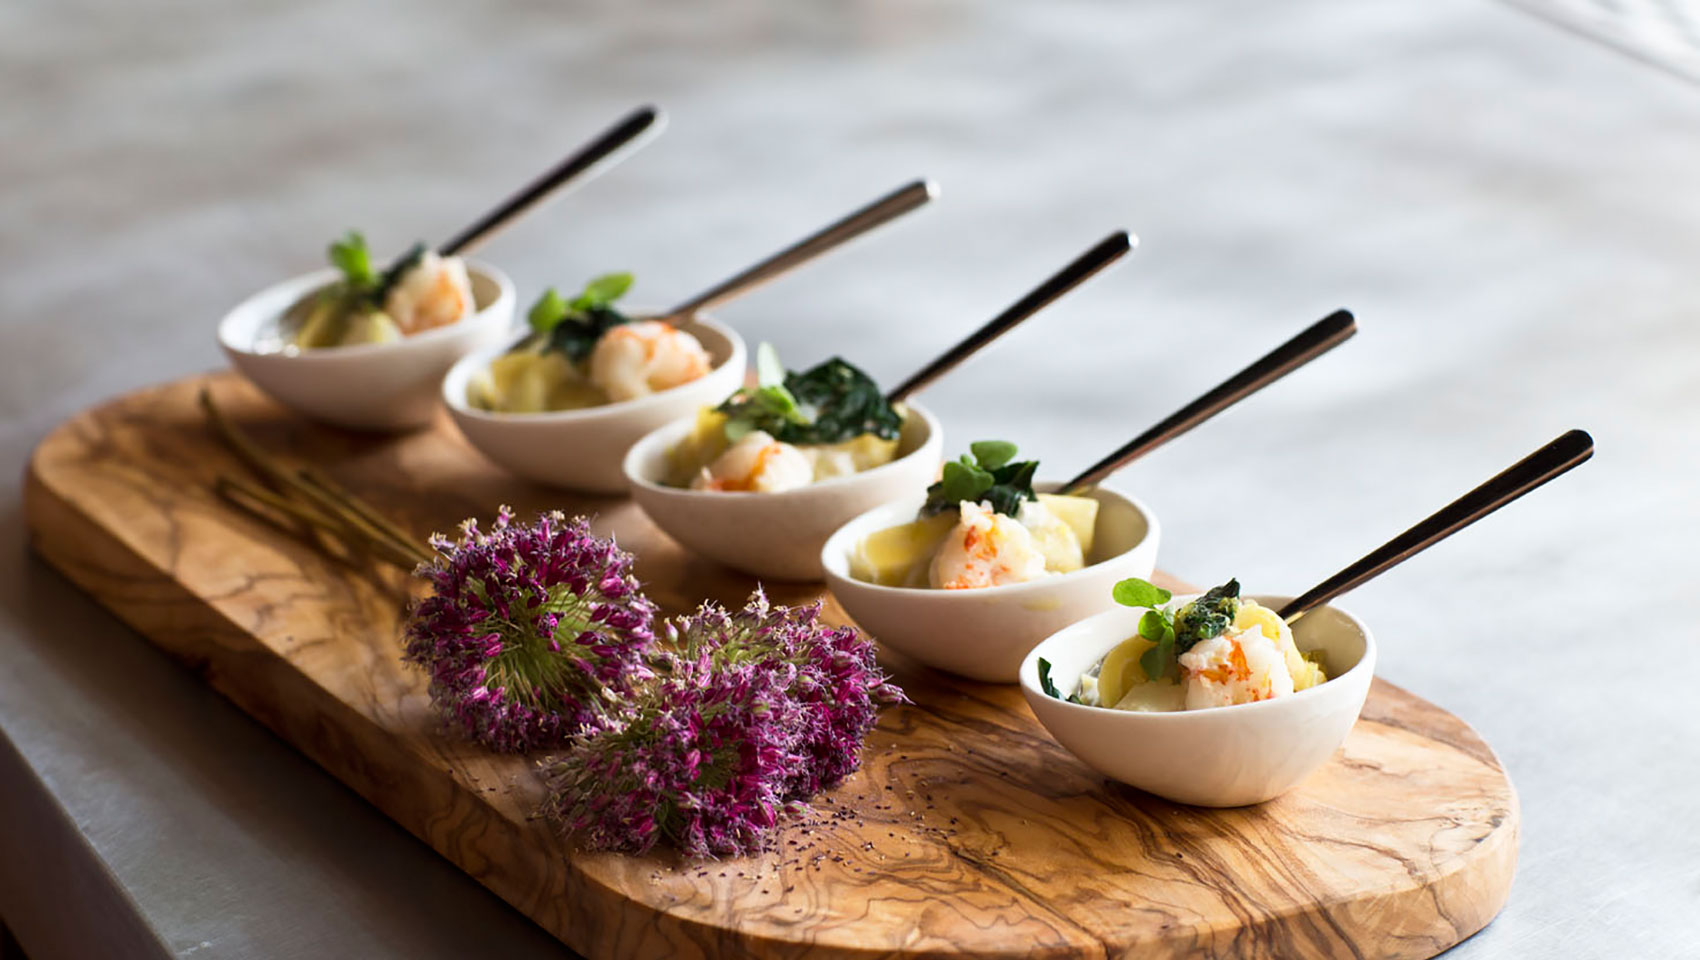 Mini bowls with catering fare placed upon wooden slab